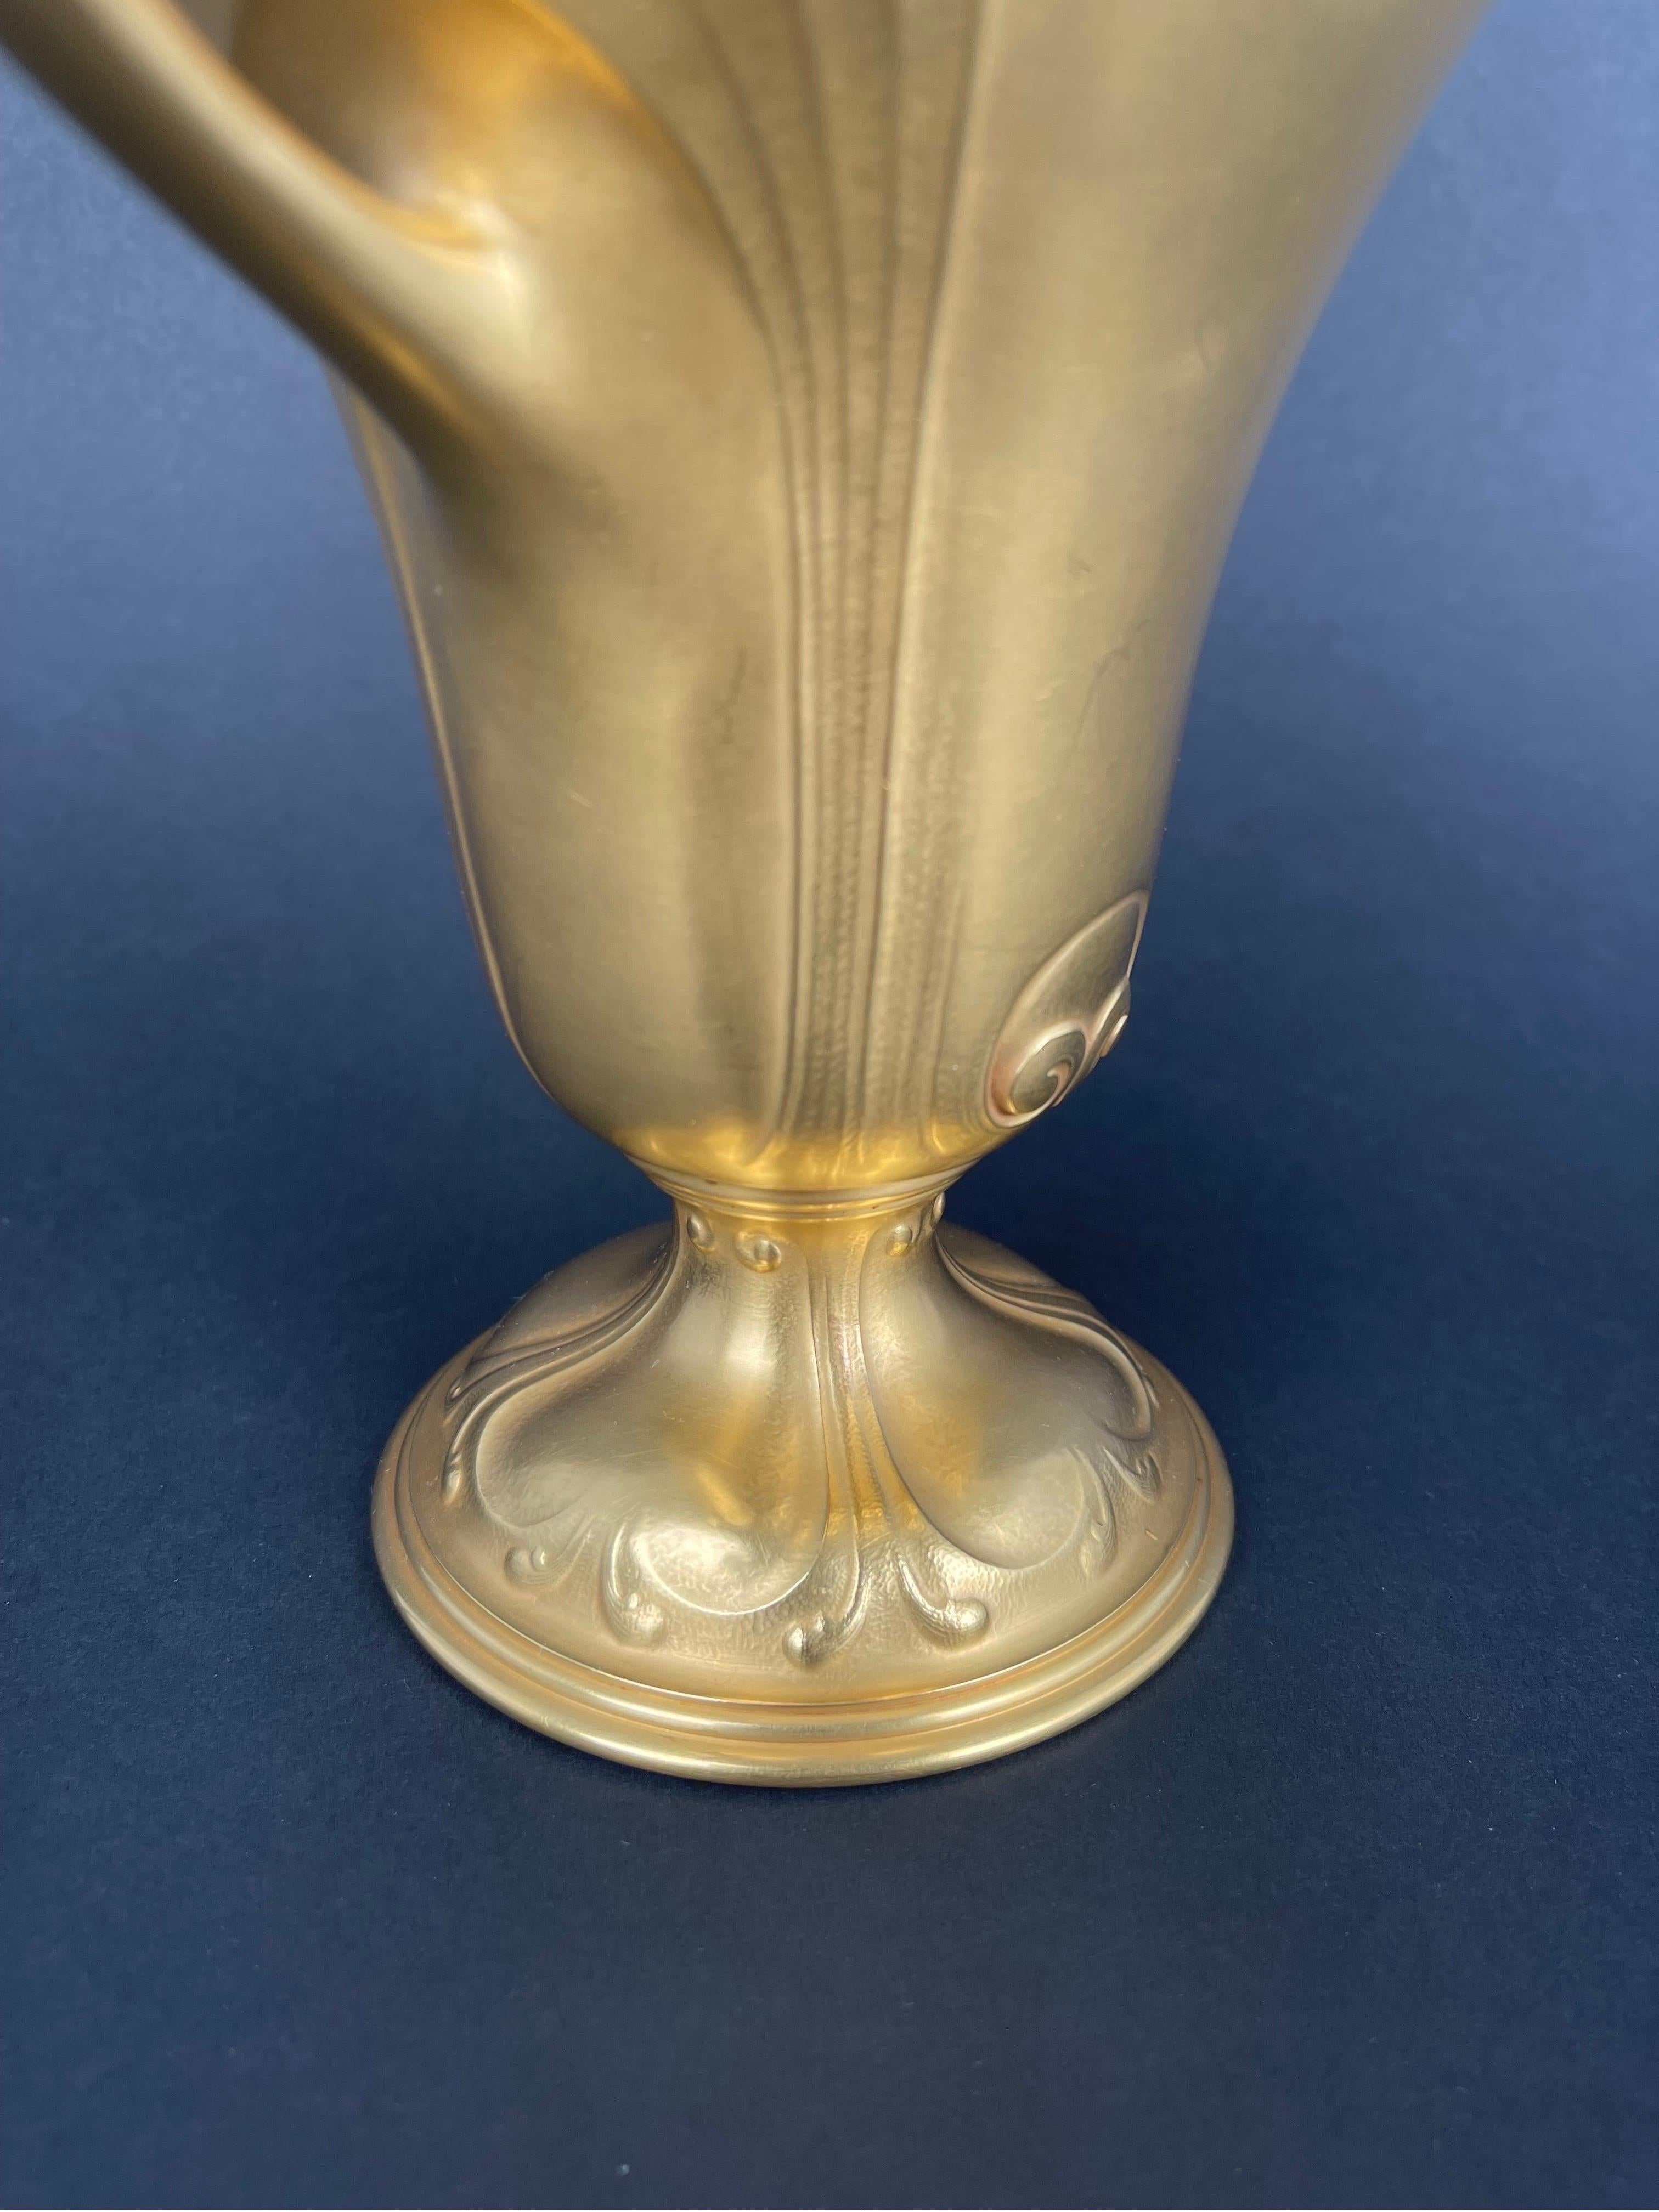 An Art Nouveau 18k Yellow Gold Trophy By Tiffany & Co. In Good Condition For Sale In Pasadena, CA